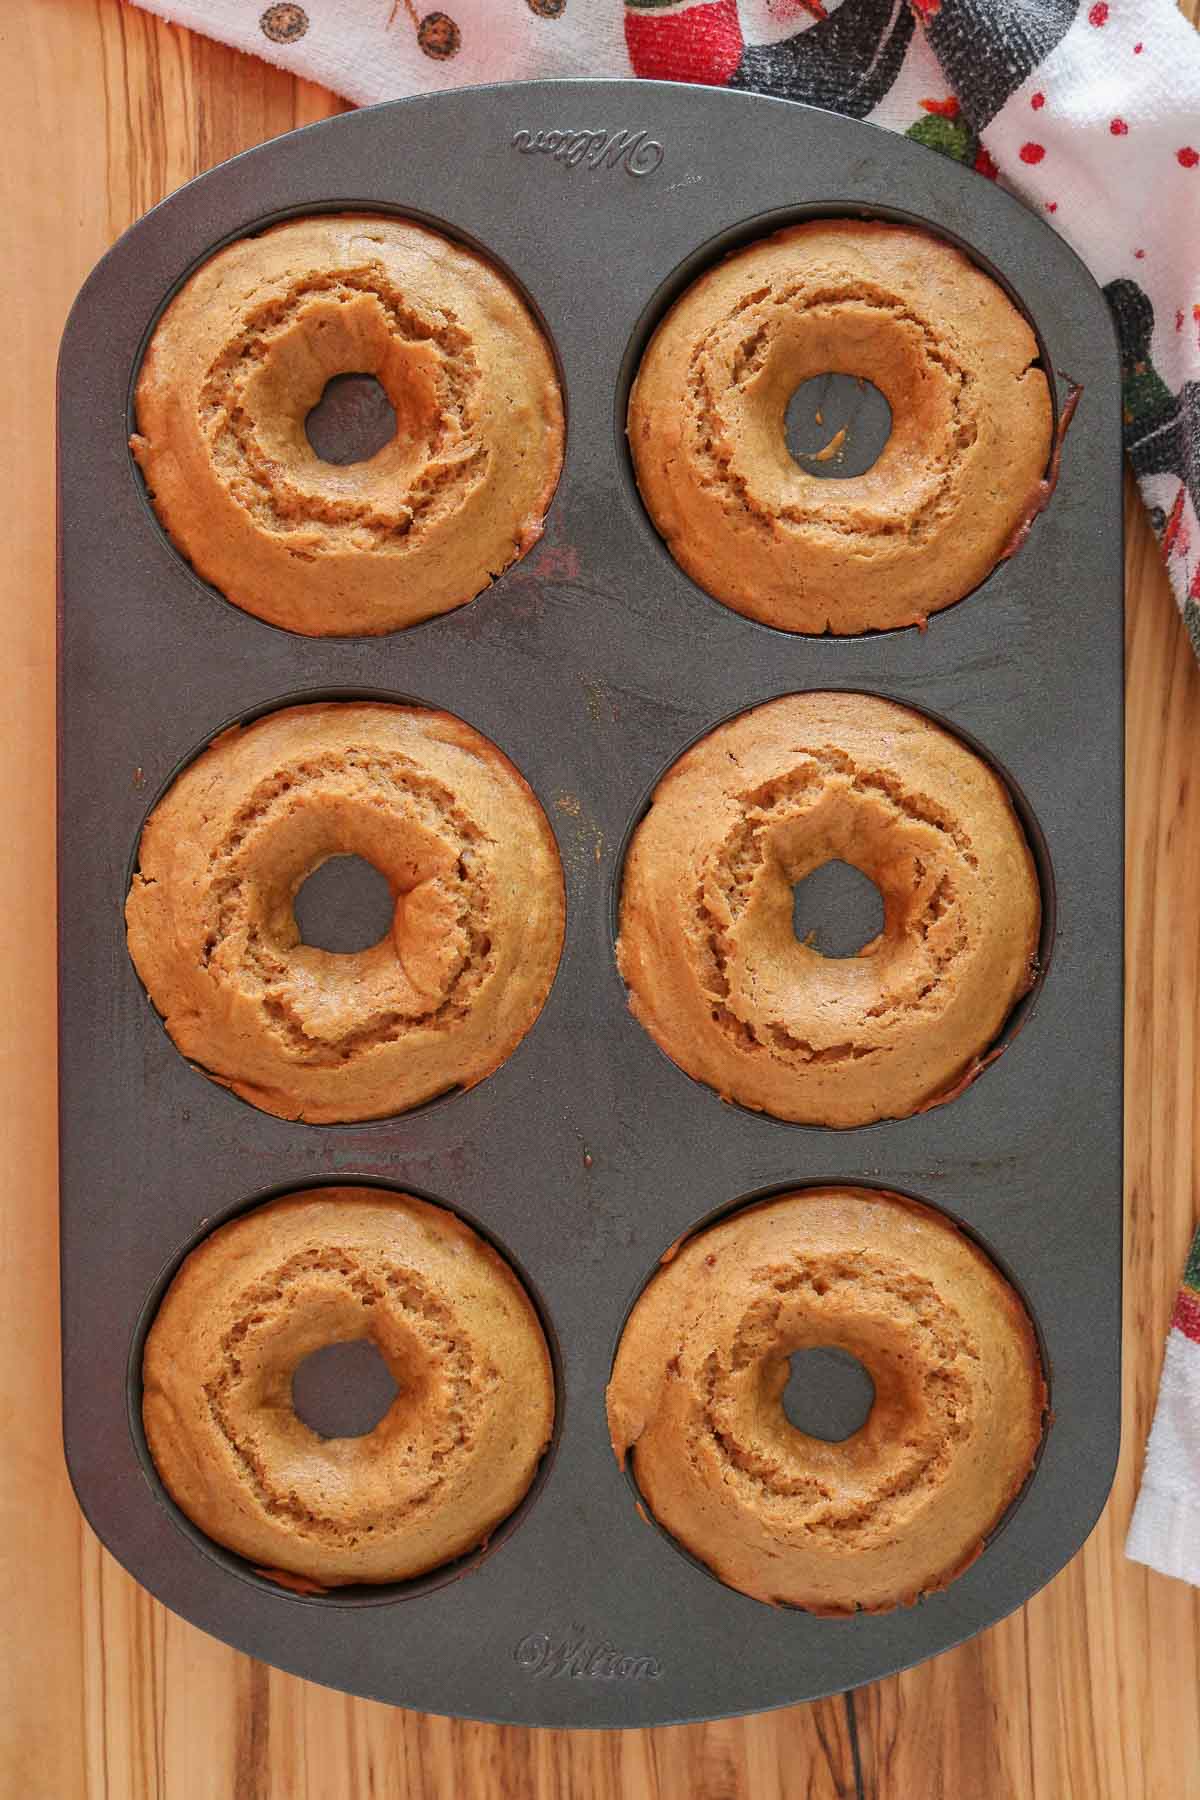 Donuts in a baking pan after being baked.